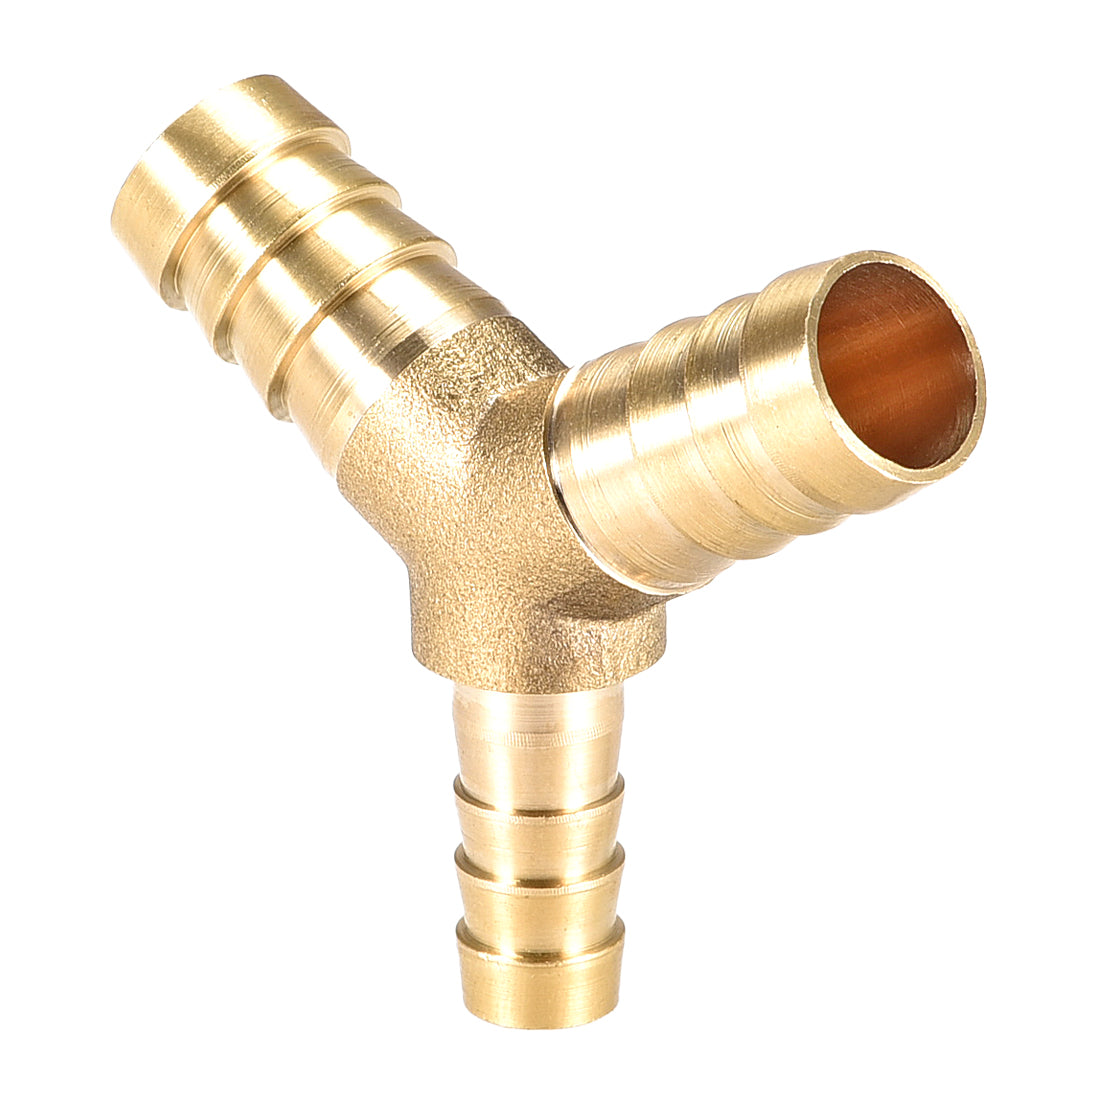 Uxcell Uxcell 8mm x 6mm x 8mm Hose ID Brass Reducer Barb Fitting Y-Shaped 3 Way Tee Connector Adapter 3pcs